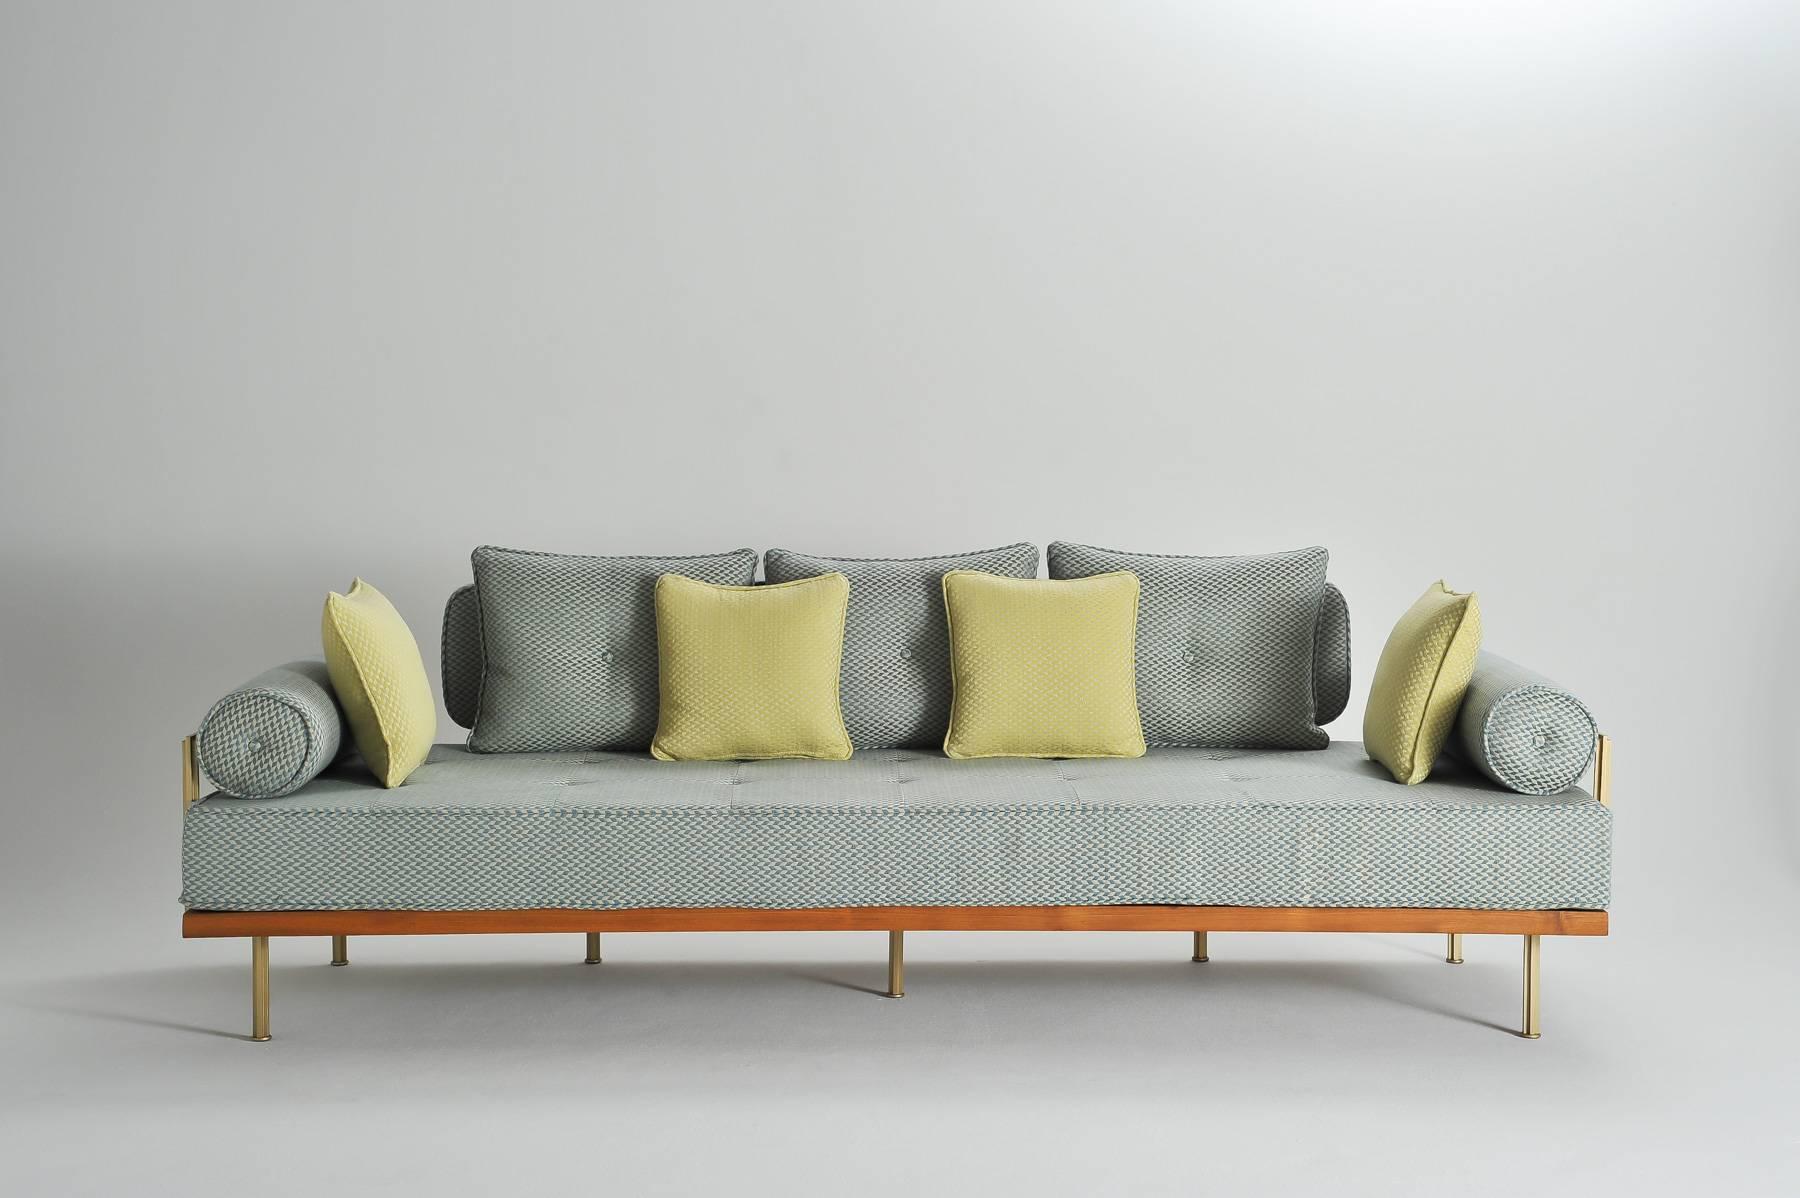 Model: PT70 three-seat sofa (Indoor)
Frame: Reclaimed hardwood
Frame finish: Diamond Oiled
Structure: Extruded and hand-welded solid brass rods
Structure finish: Brass golden sand 
Seat material: 100% Latex
Upholstery: included
Fabric: not included,